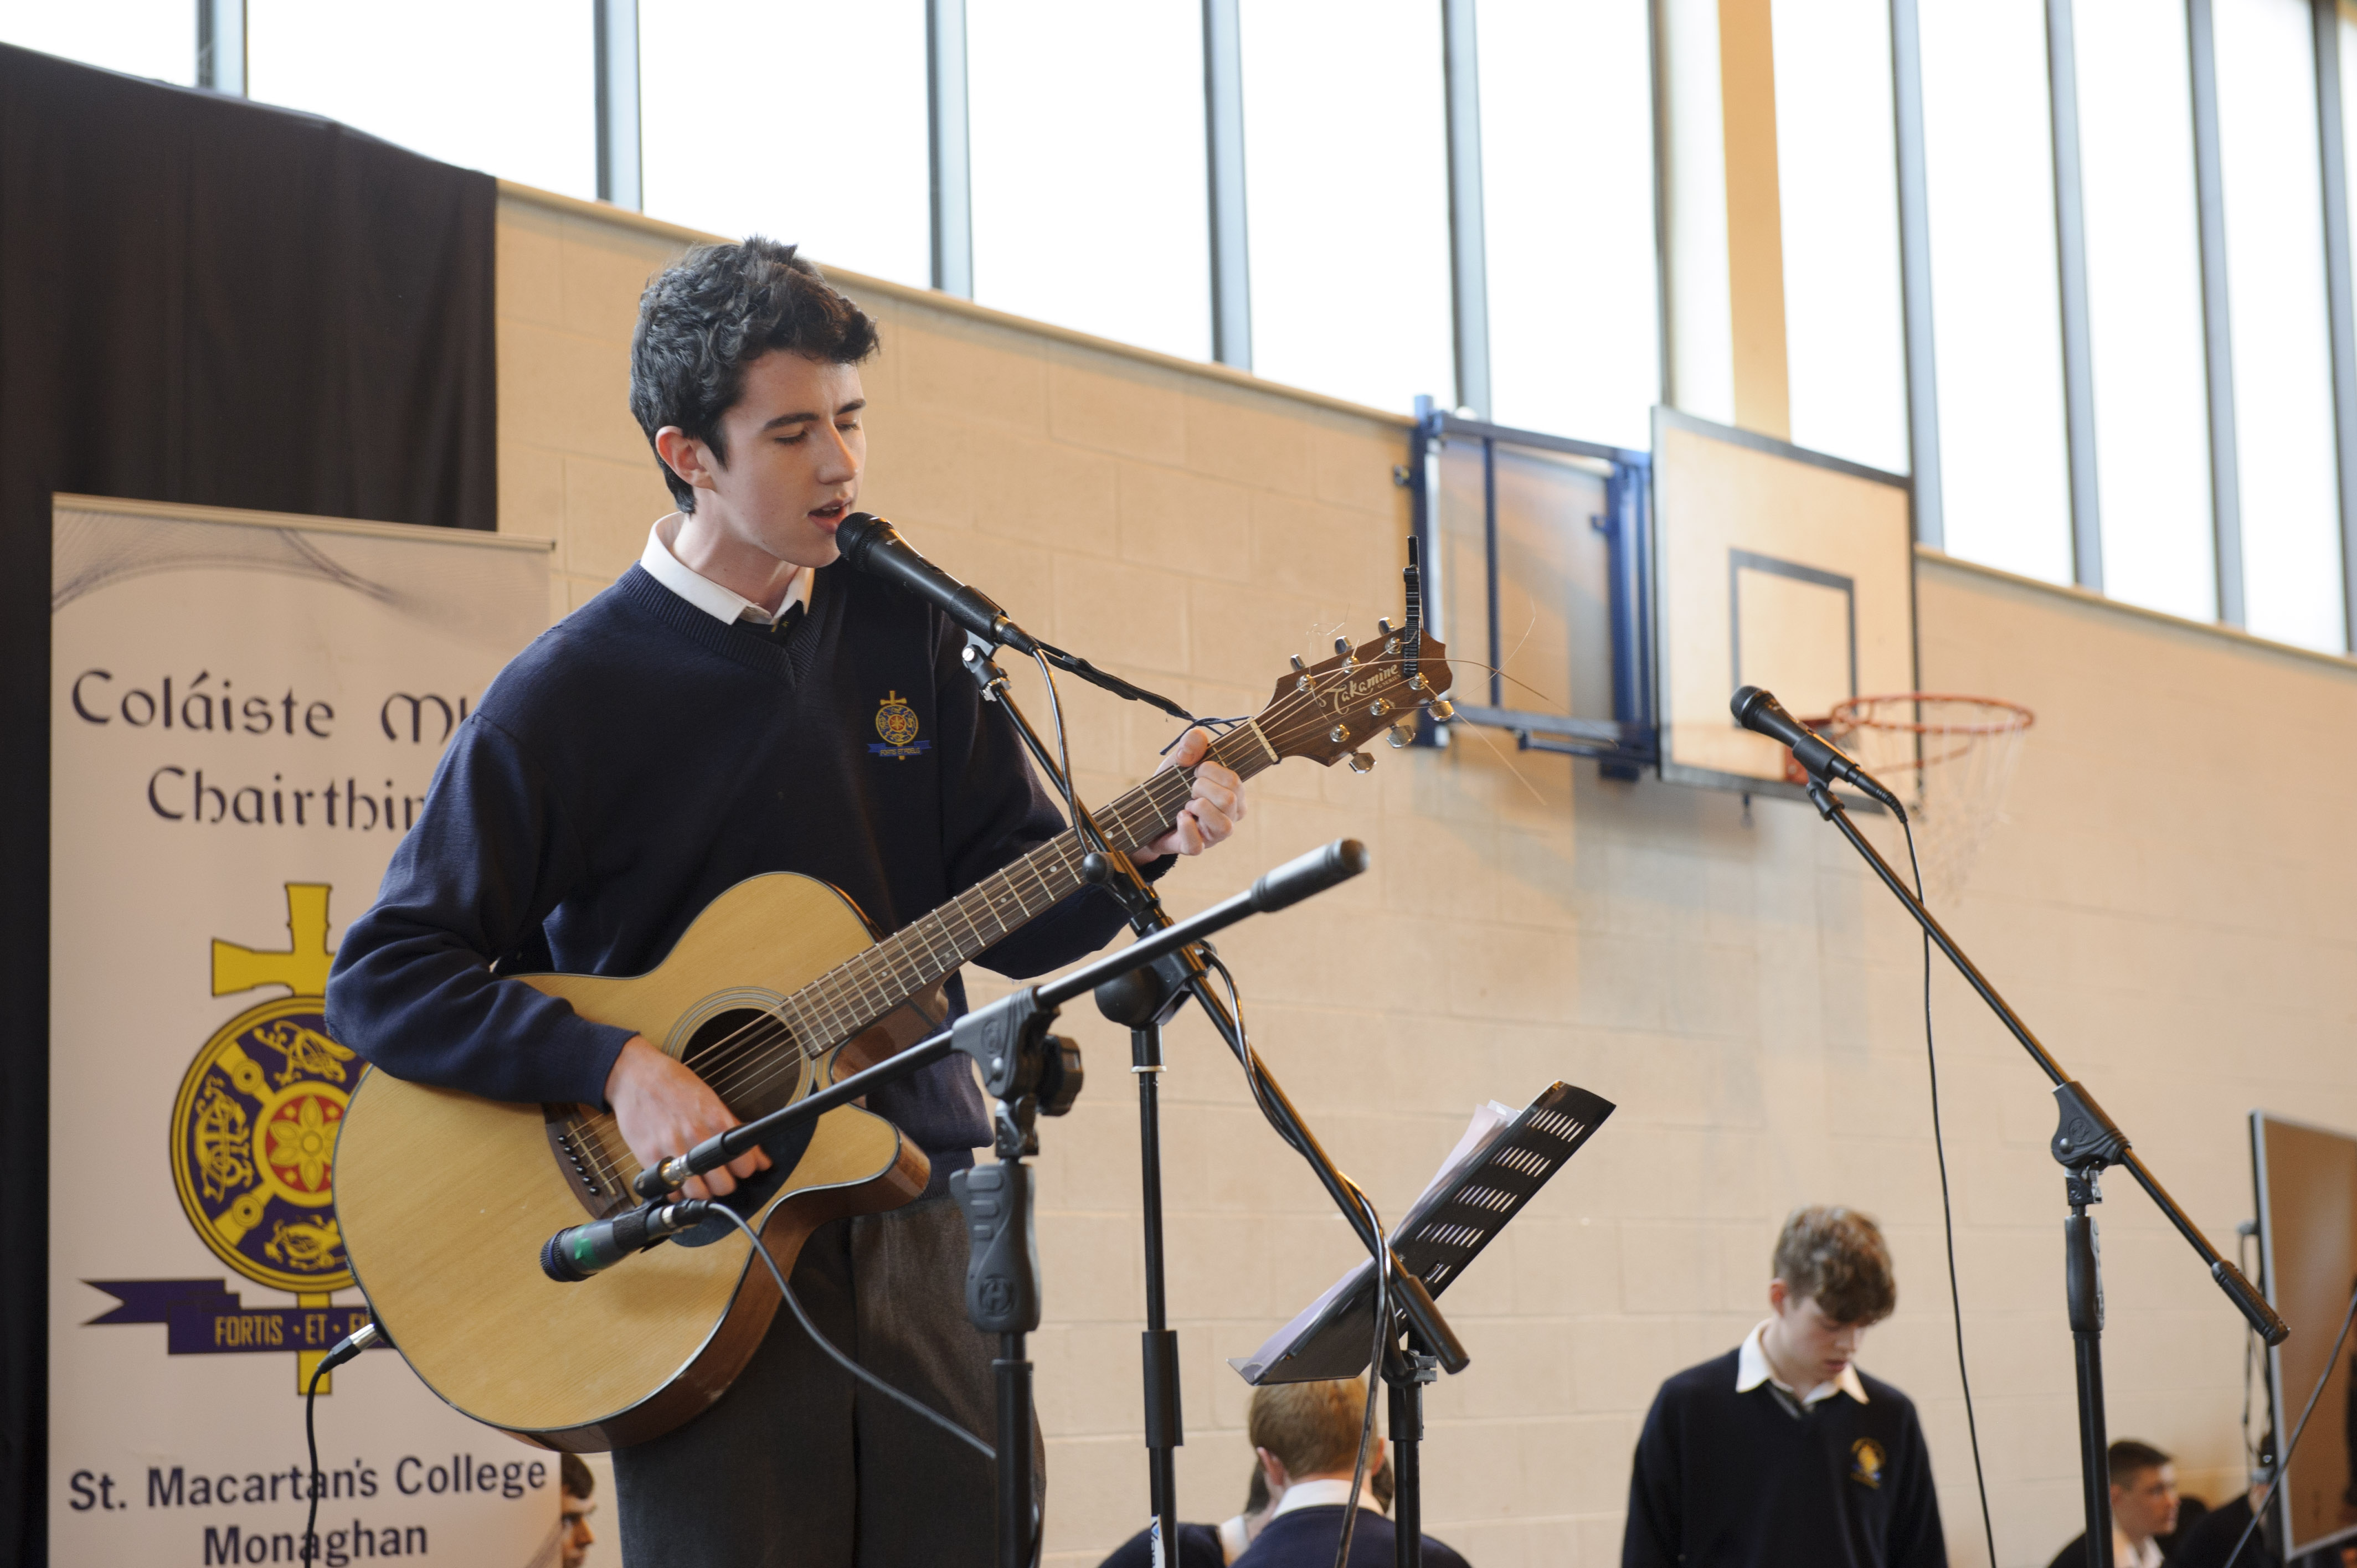 Fintan Treanor singing at the Cycle Against Suicide event at St Macartan's College on Tuesday morning. Â©Rory Geary/The Northern Standard